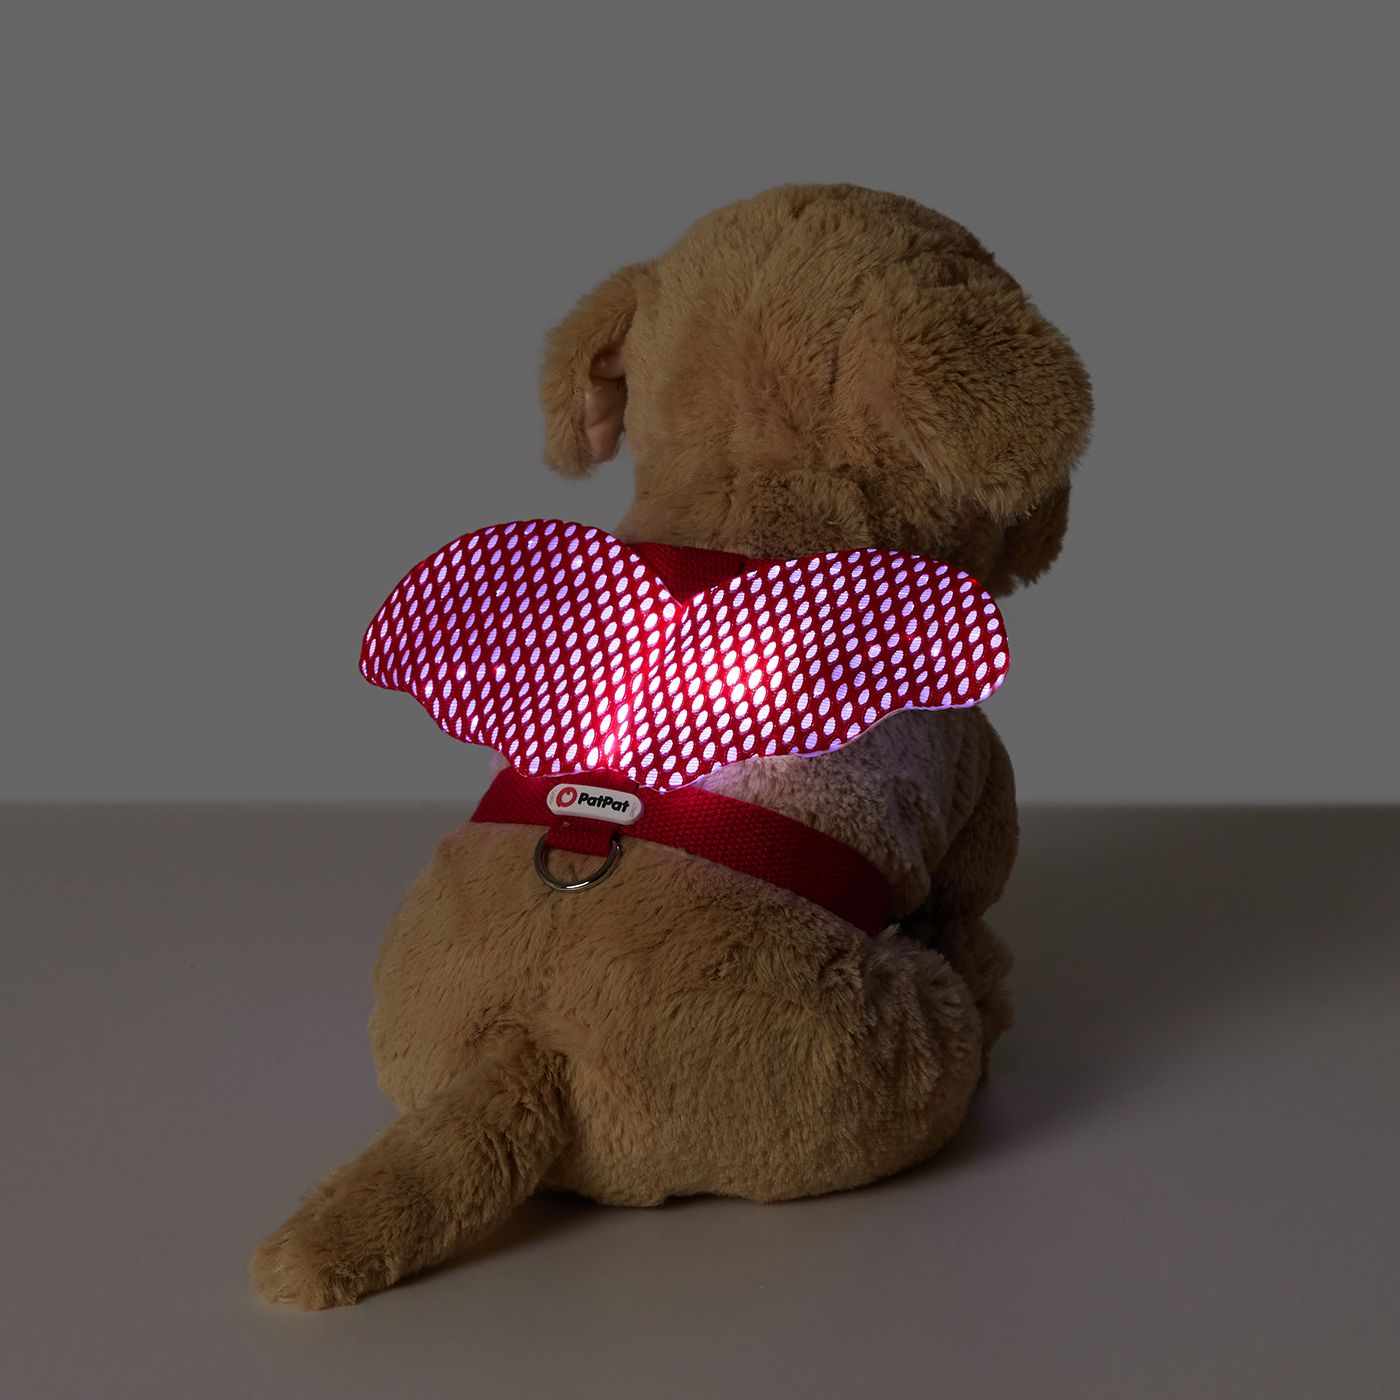 Go-Glow Illuminating Pet Harness Light Up Wings For Small Medium Pets Including Controller (Built-In Battery)